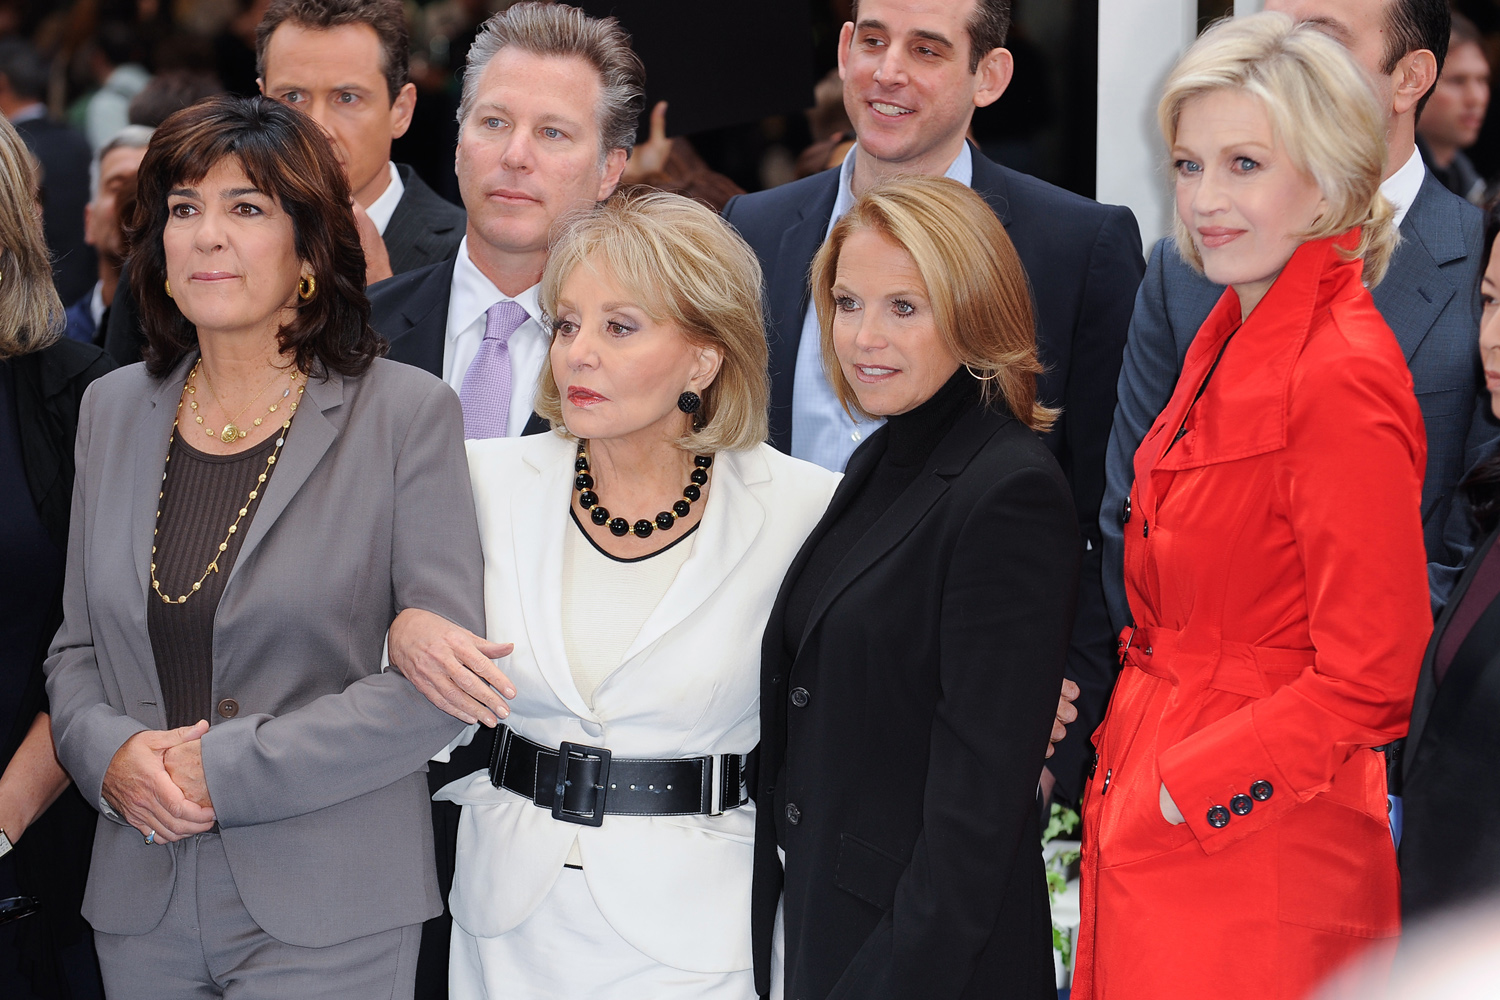 News reporters Christiane Amanpour, Barbara Walters, Katie Couric, and Diane Sawyer tape an interview at "Good Morning America" at the ABC Times Square Studios in New York City, Oct. 3, 2011.